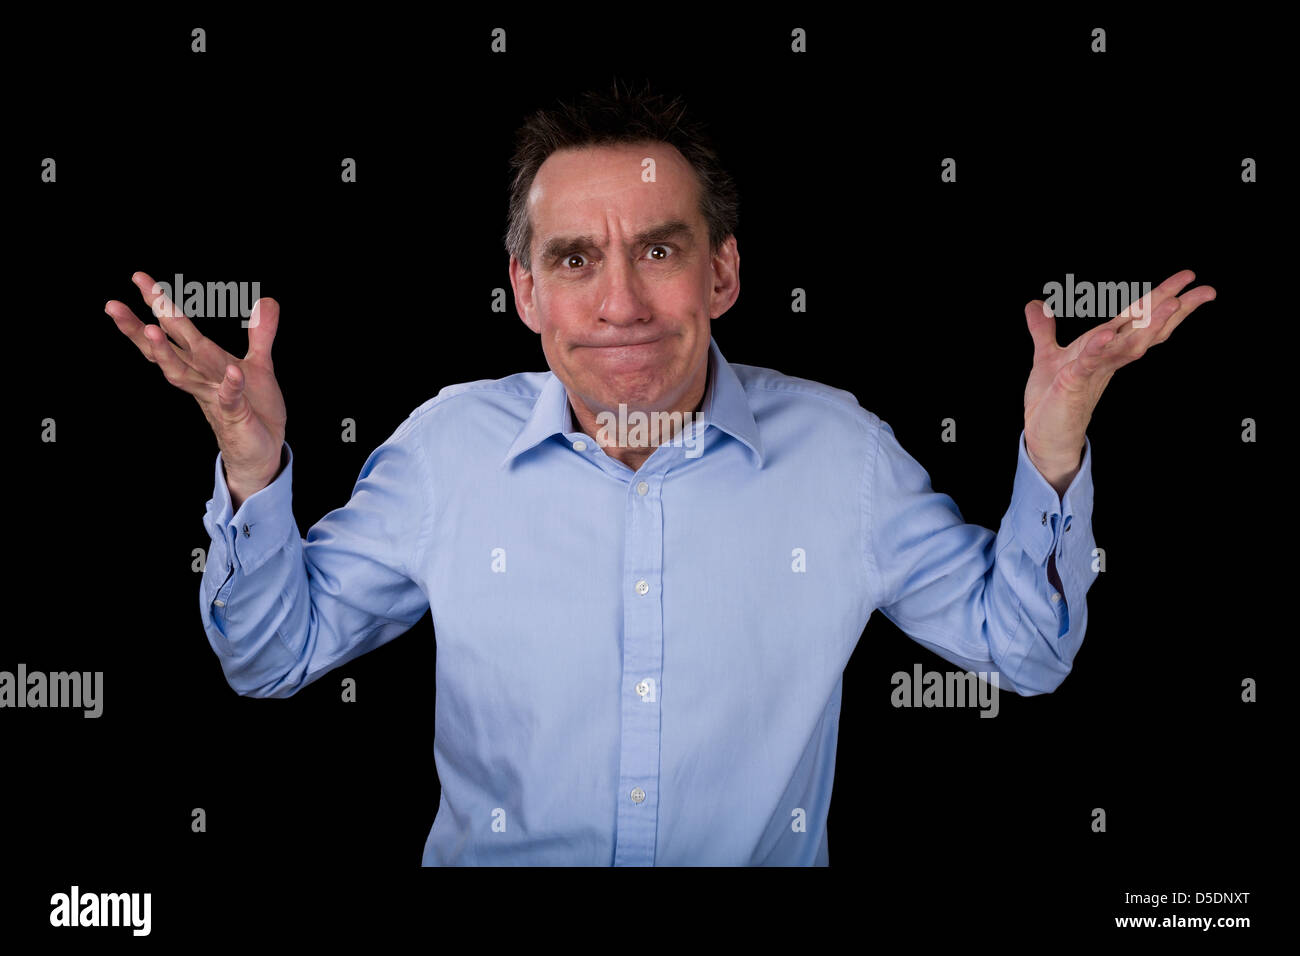 Angry Middle Age Business Man Hands Raised in Frustration Black Background Stock Photo